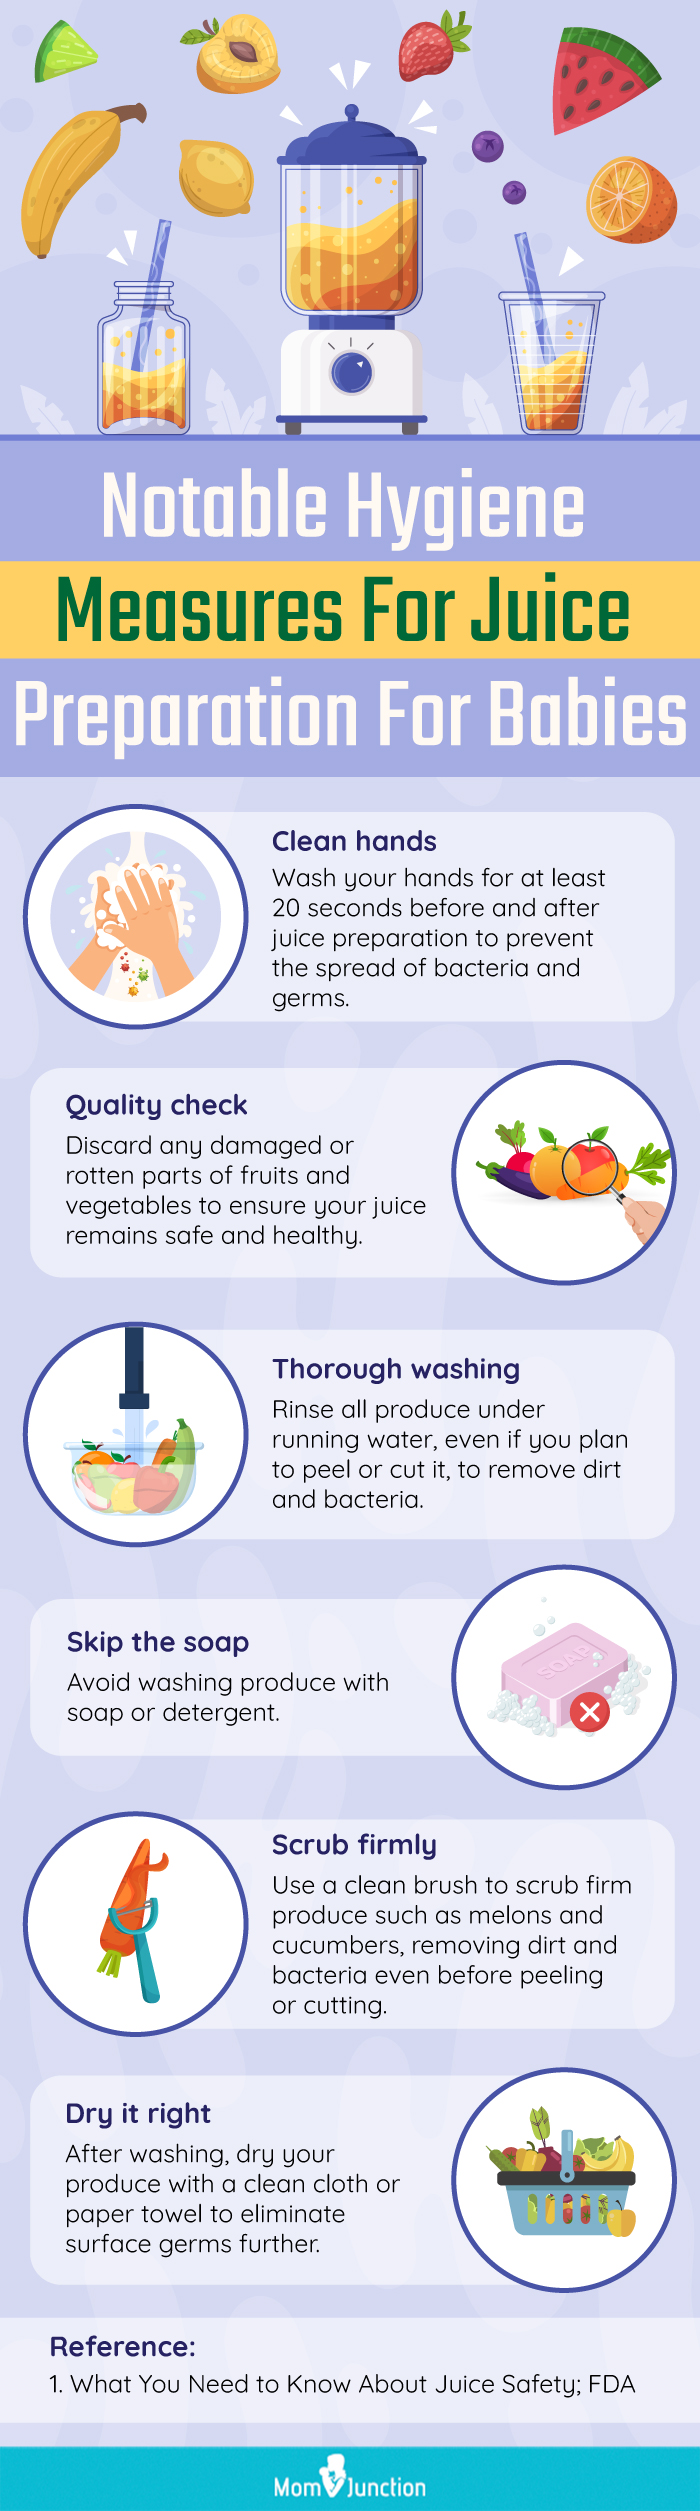 notable hygiene measures for juice preparation for babies (infographic)